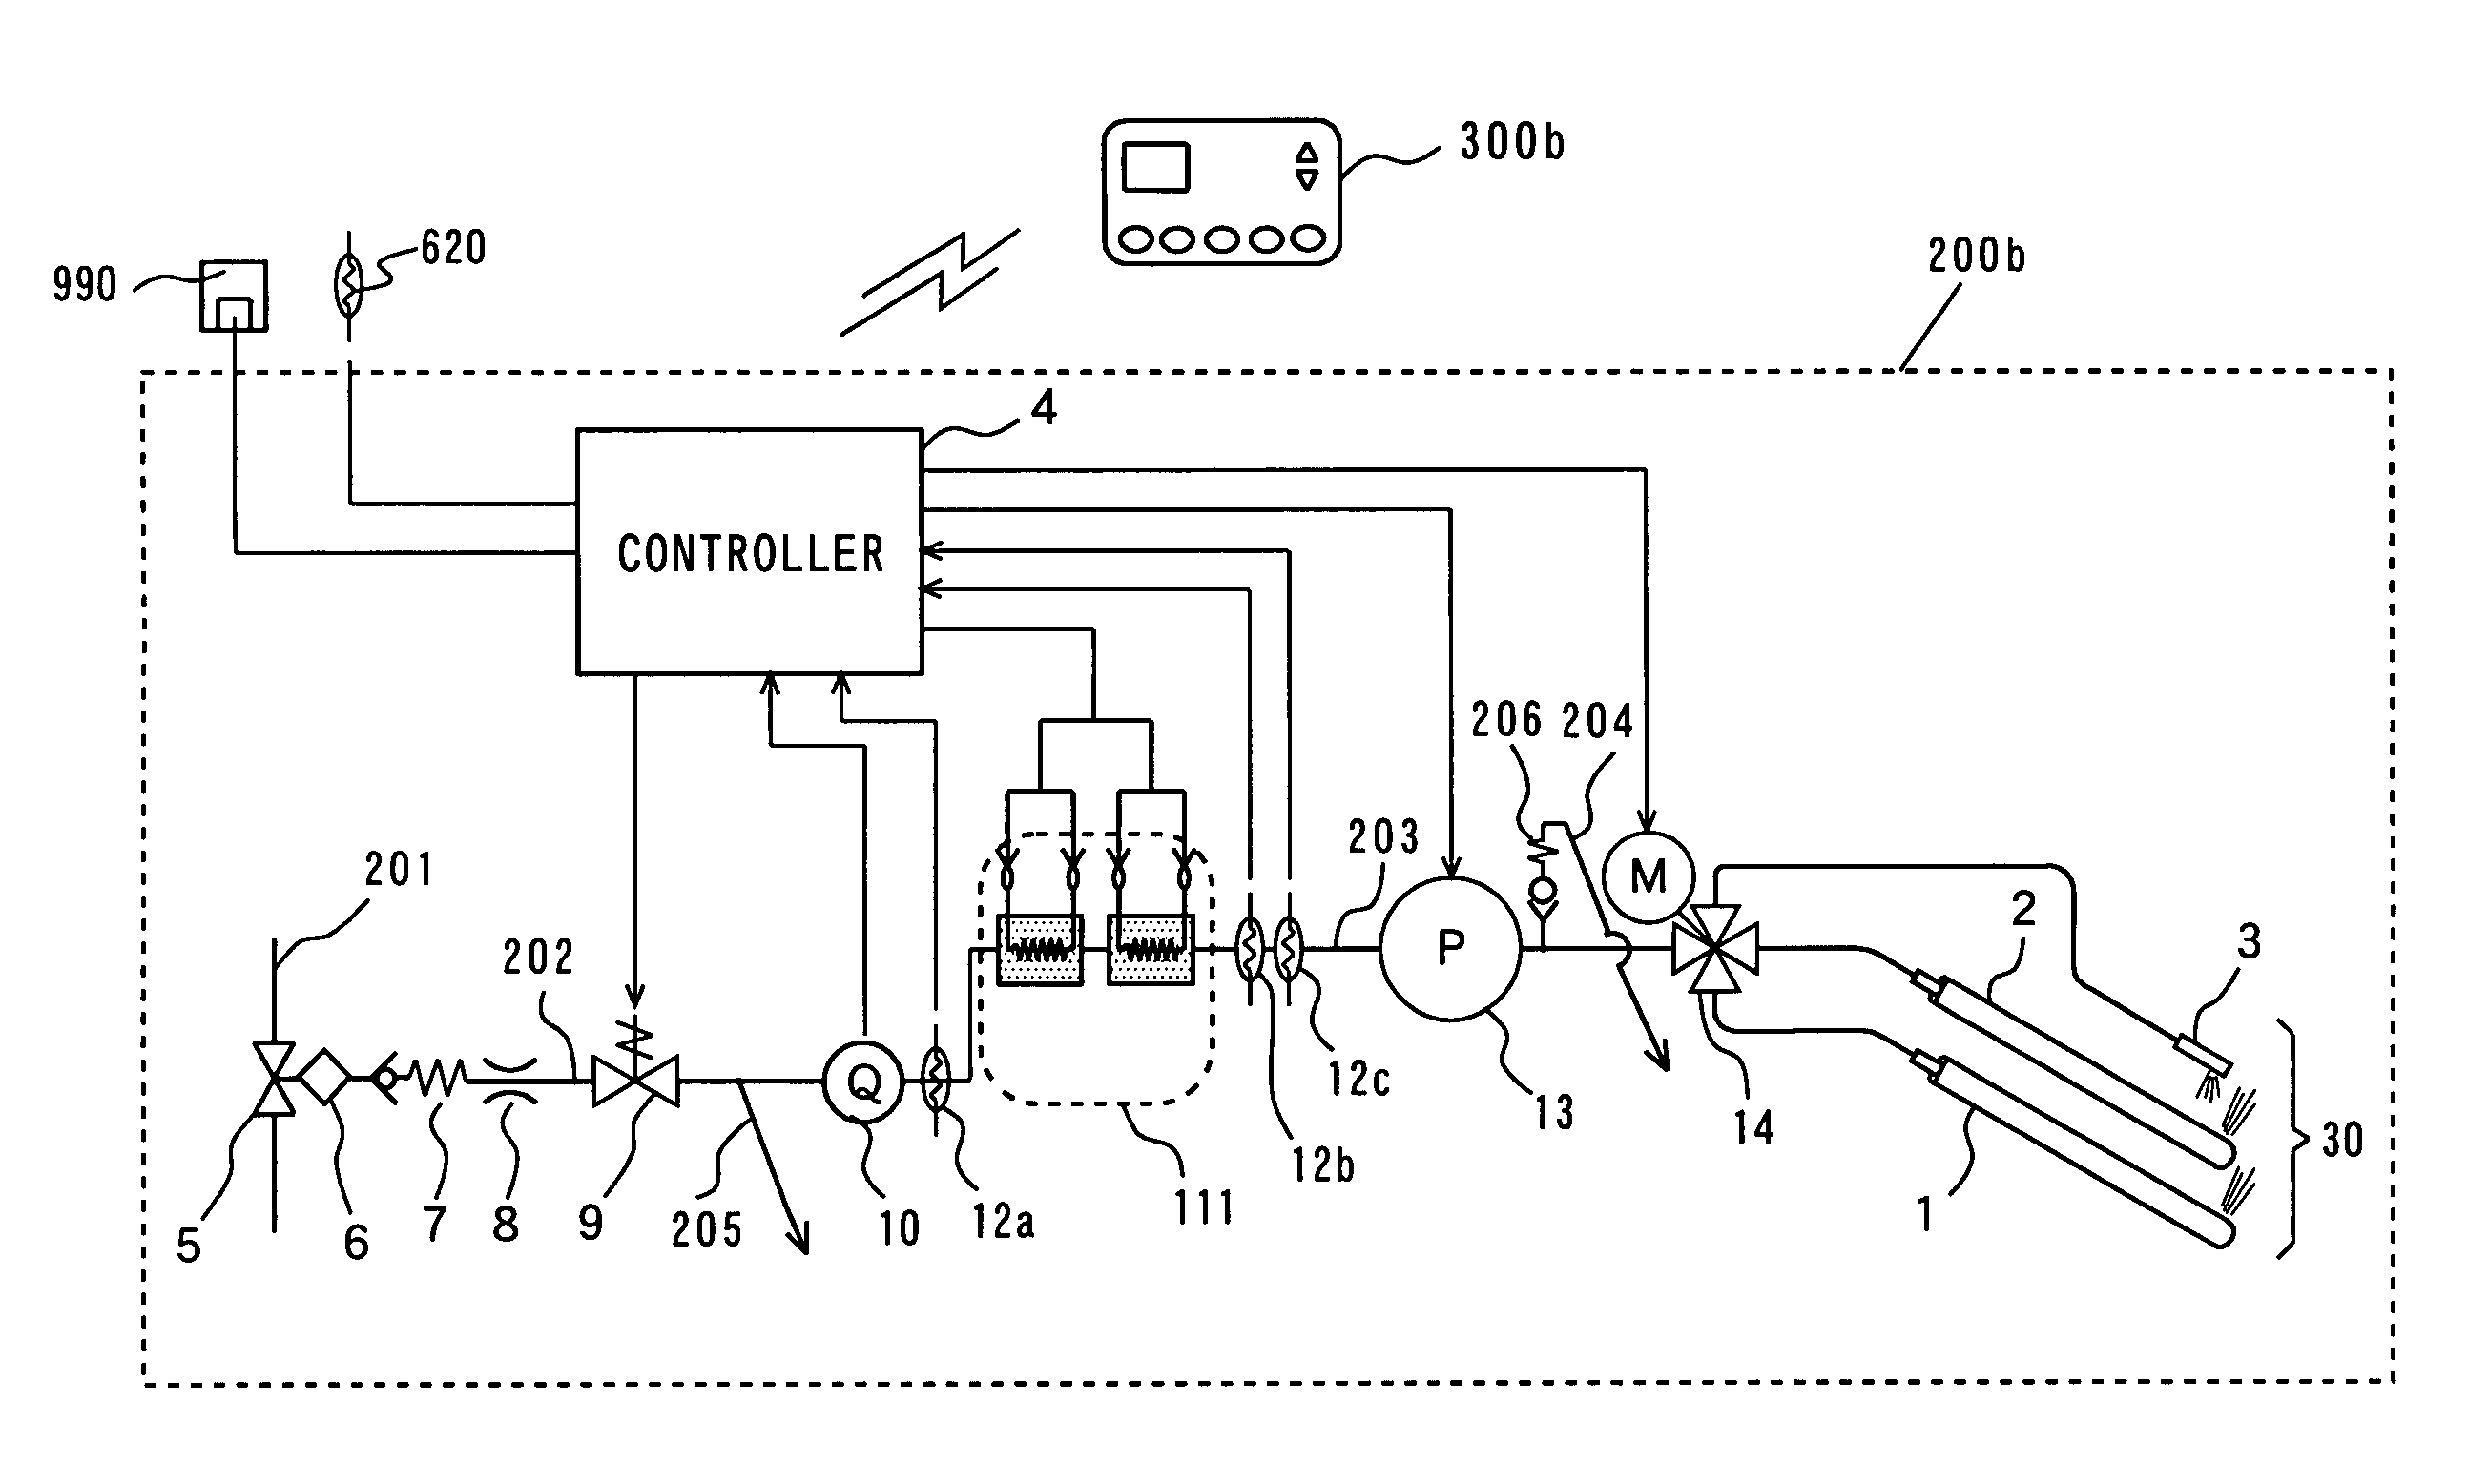 Fluid heating device and cleaning device using the same